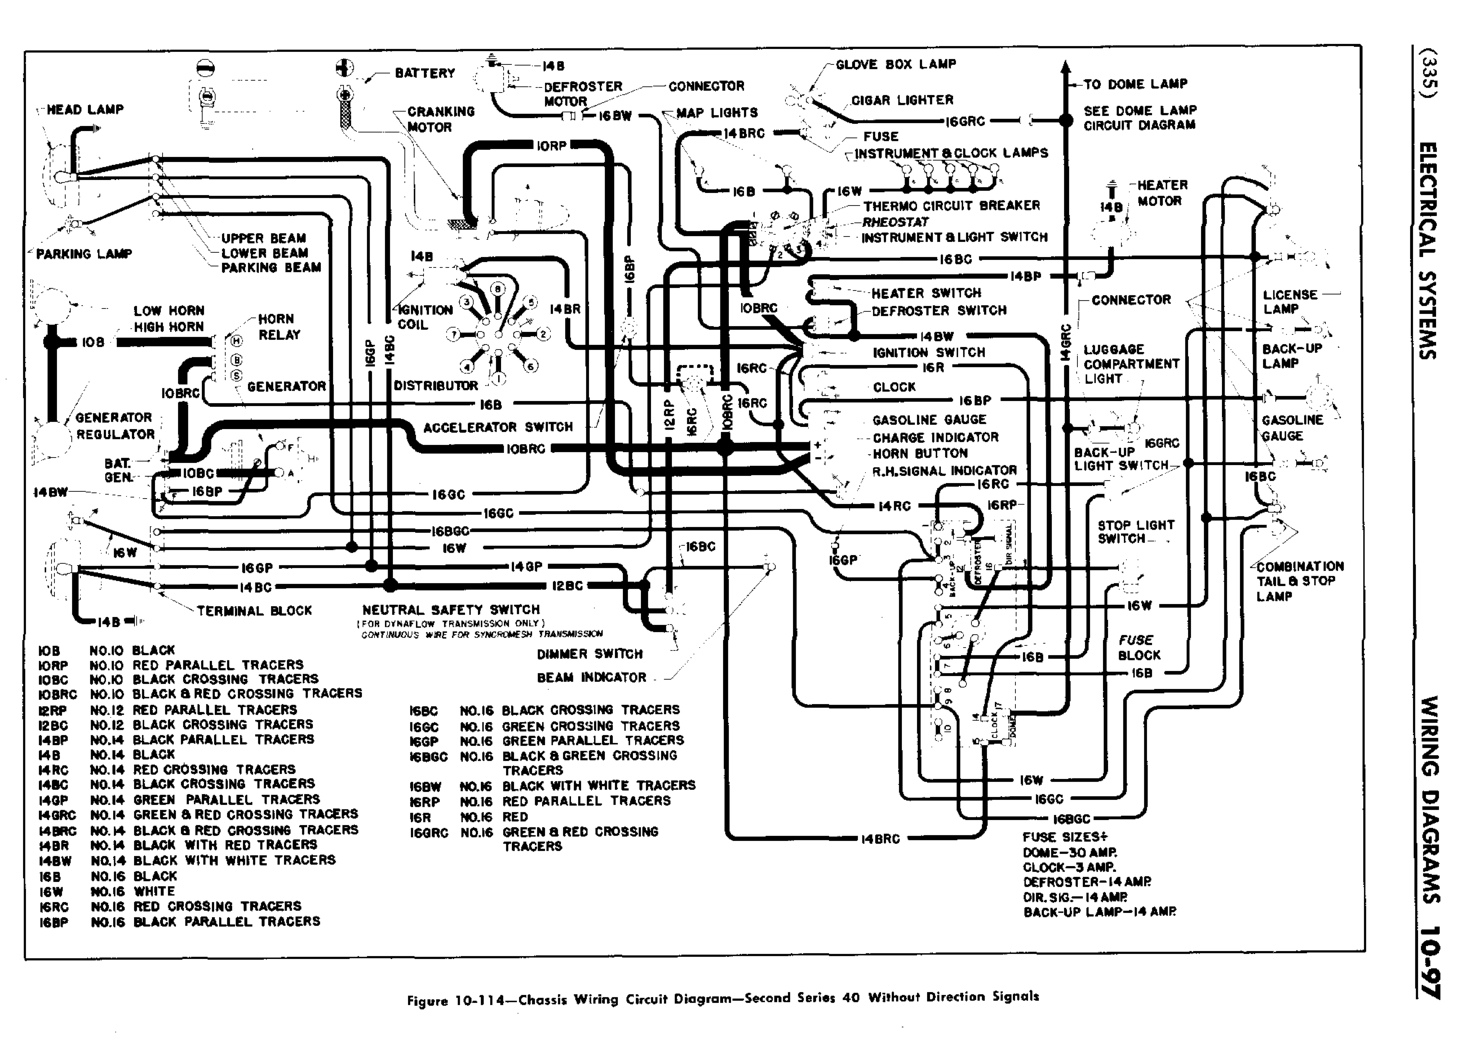 n_11 1950 Buick Shop Manual - Electrical Systems-097-097.jpg